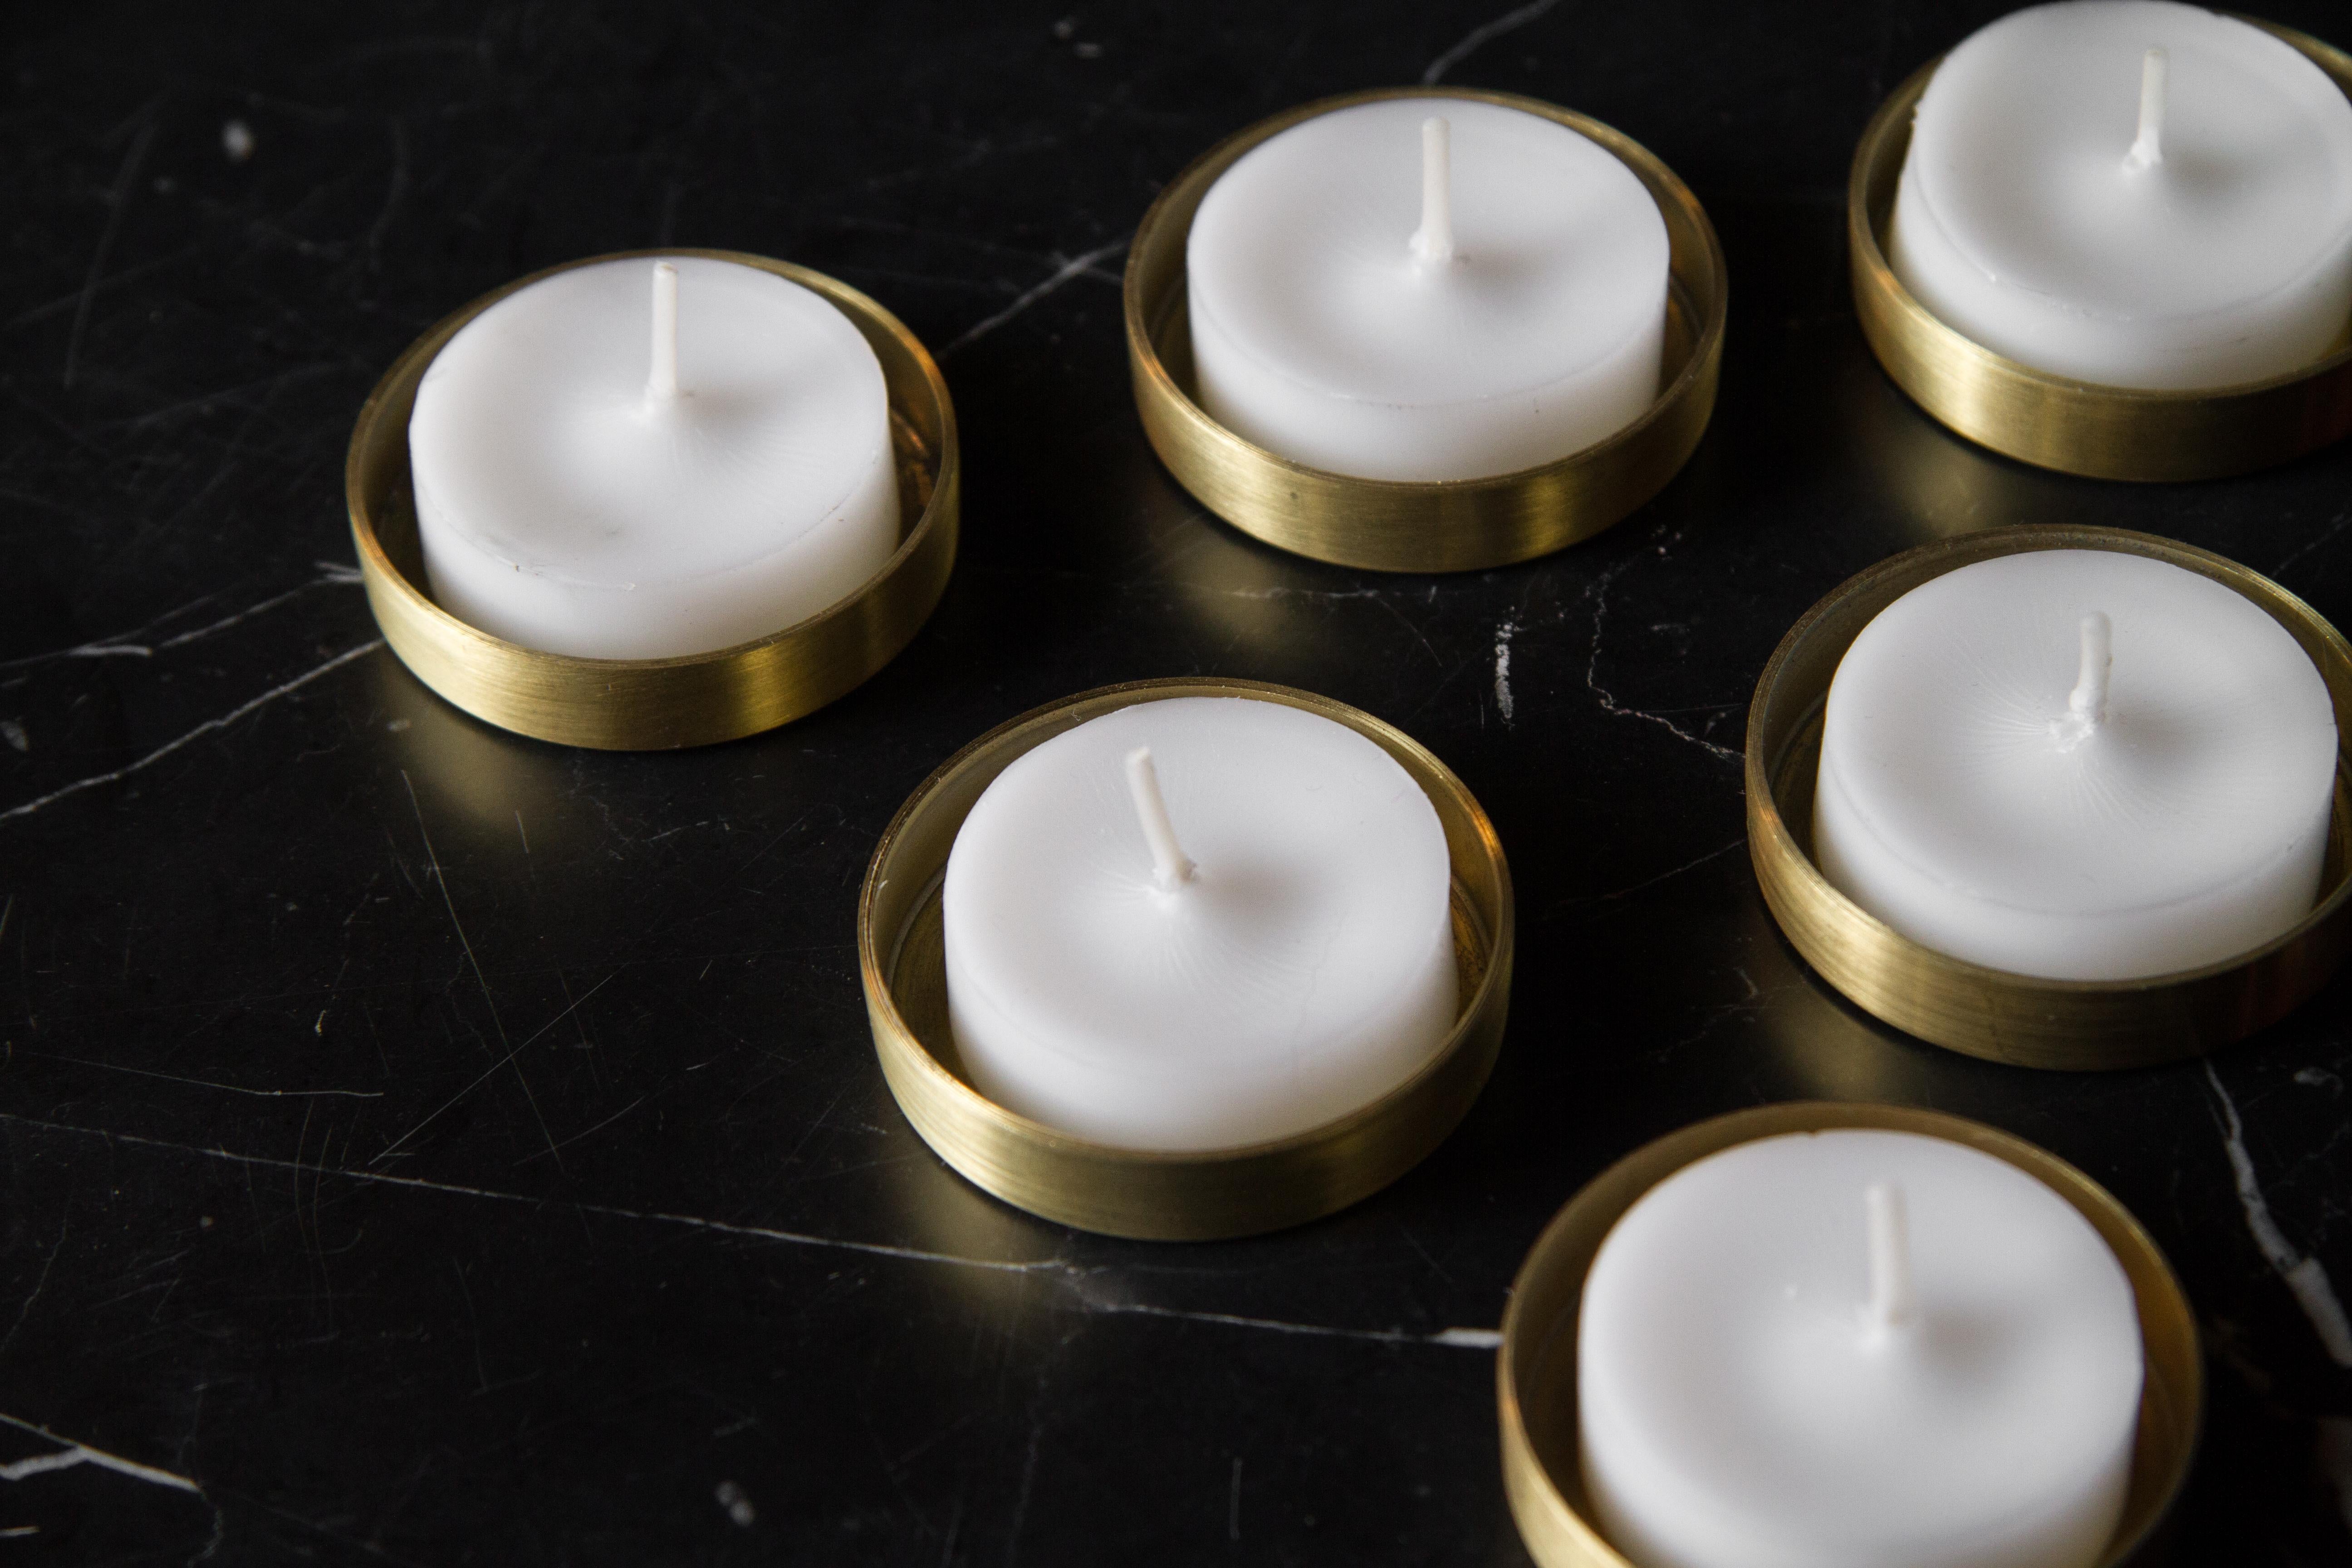 The (wh)ORE HAüS STUDIOS small goods collection was made for those that wanted to experience the (wh)ORE HAüS brand without committing to our larger pieces. Our brass tea light cups are made with solid spun brass and adds a mood to any setting.